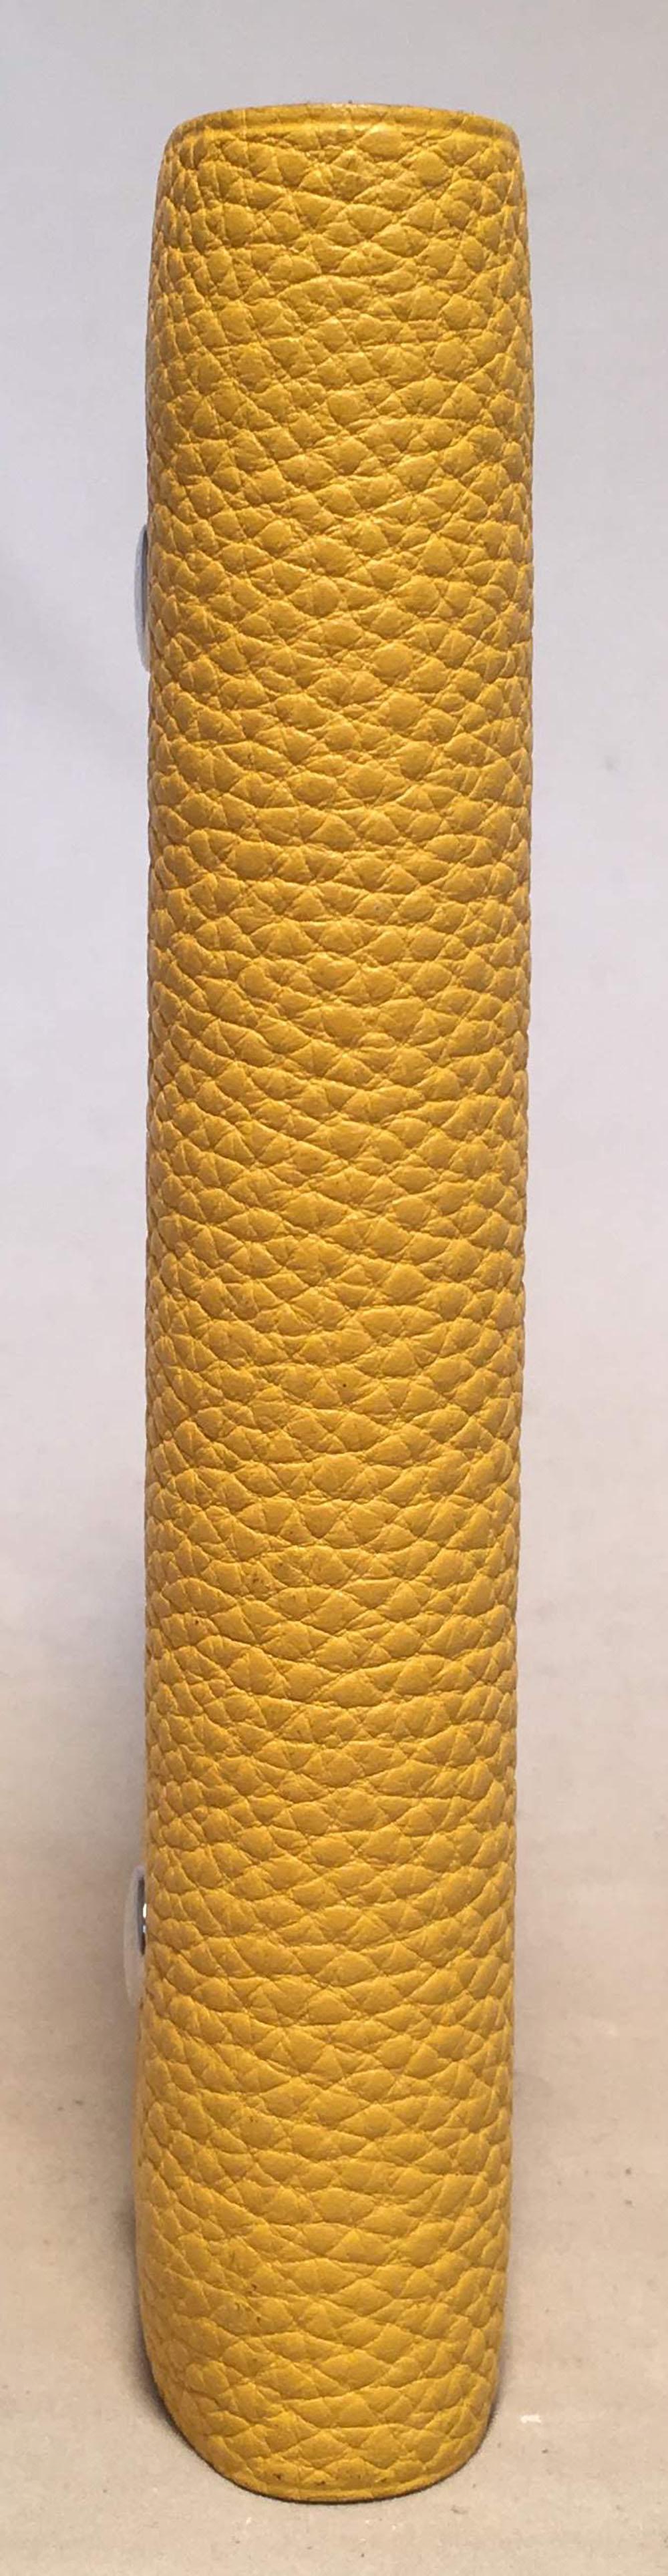 Adorable Hermes Yellow Clemence Leather Notebook in excellent condition. Yellow clemence leather exterior trimmed with silver palladium snaps. Snap closure opens to an unused spiral bound paper notebook that can easily be replaced when needed.